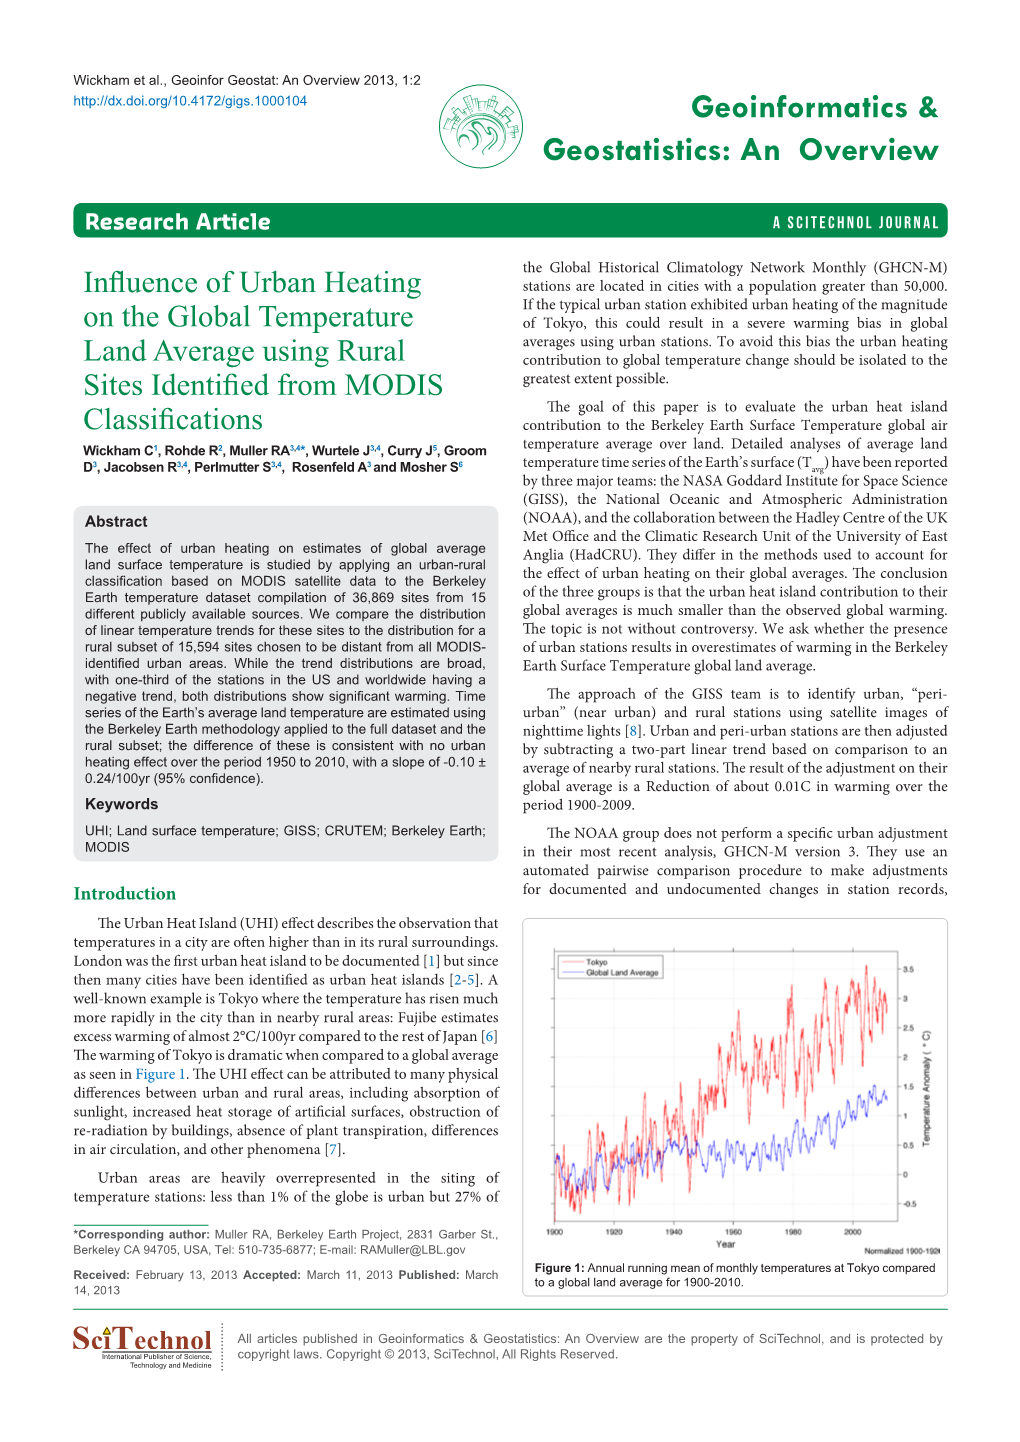 Influence of Urban Heating on the Global Temperature Land Average